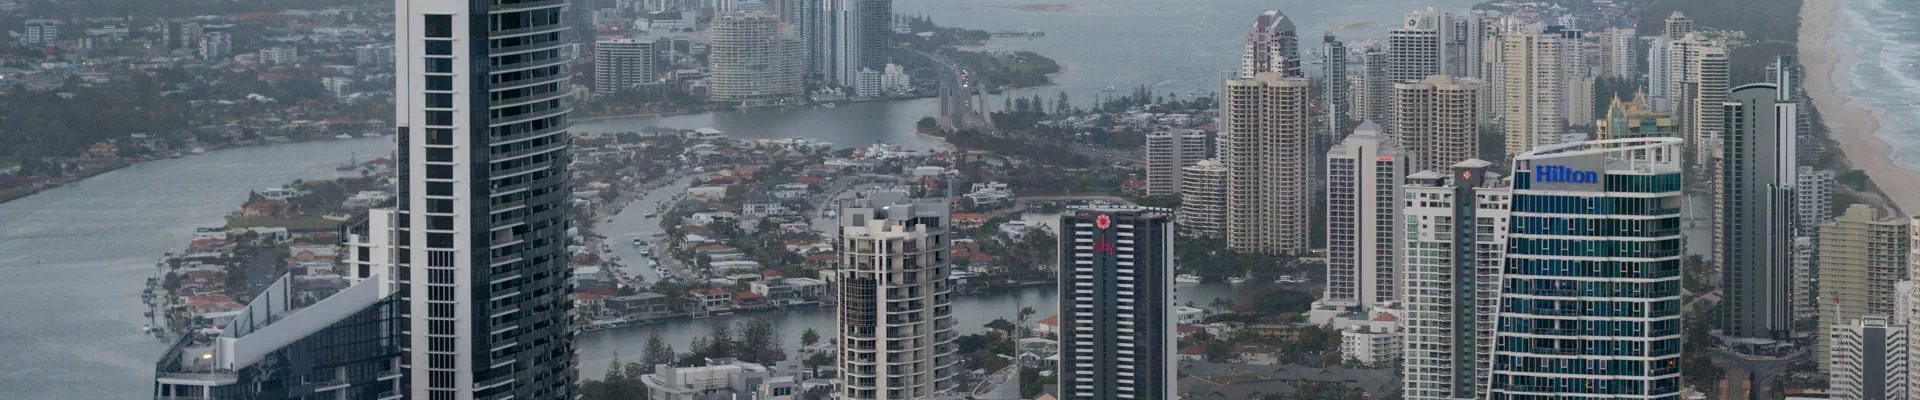 High above Surfers Paradise